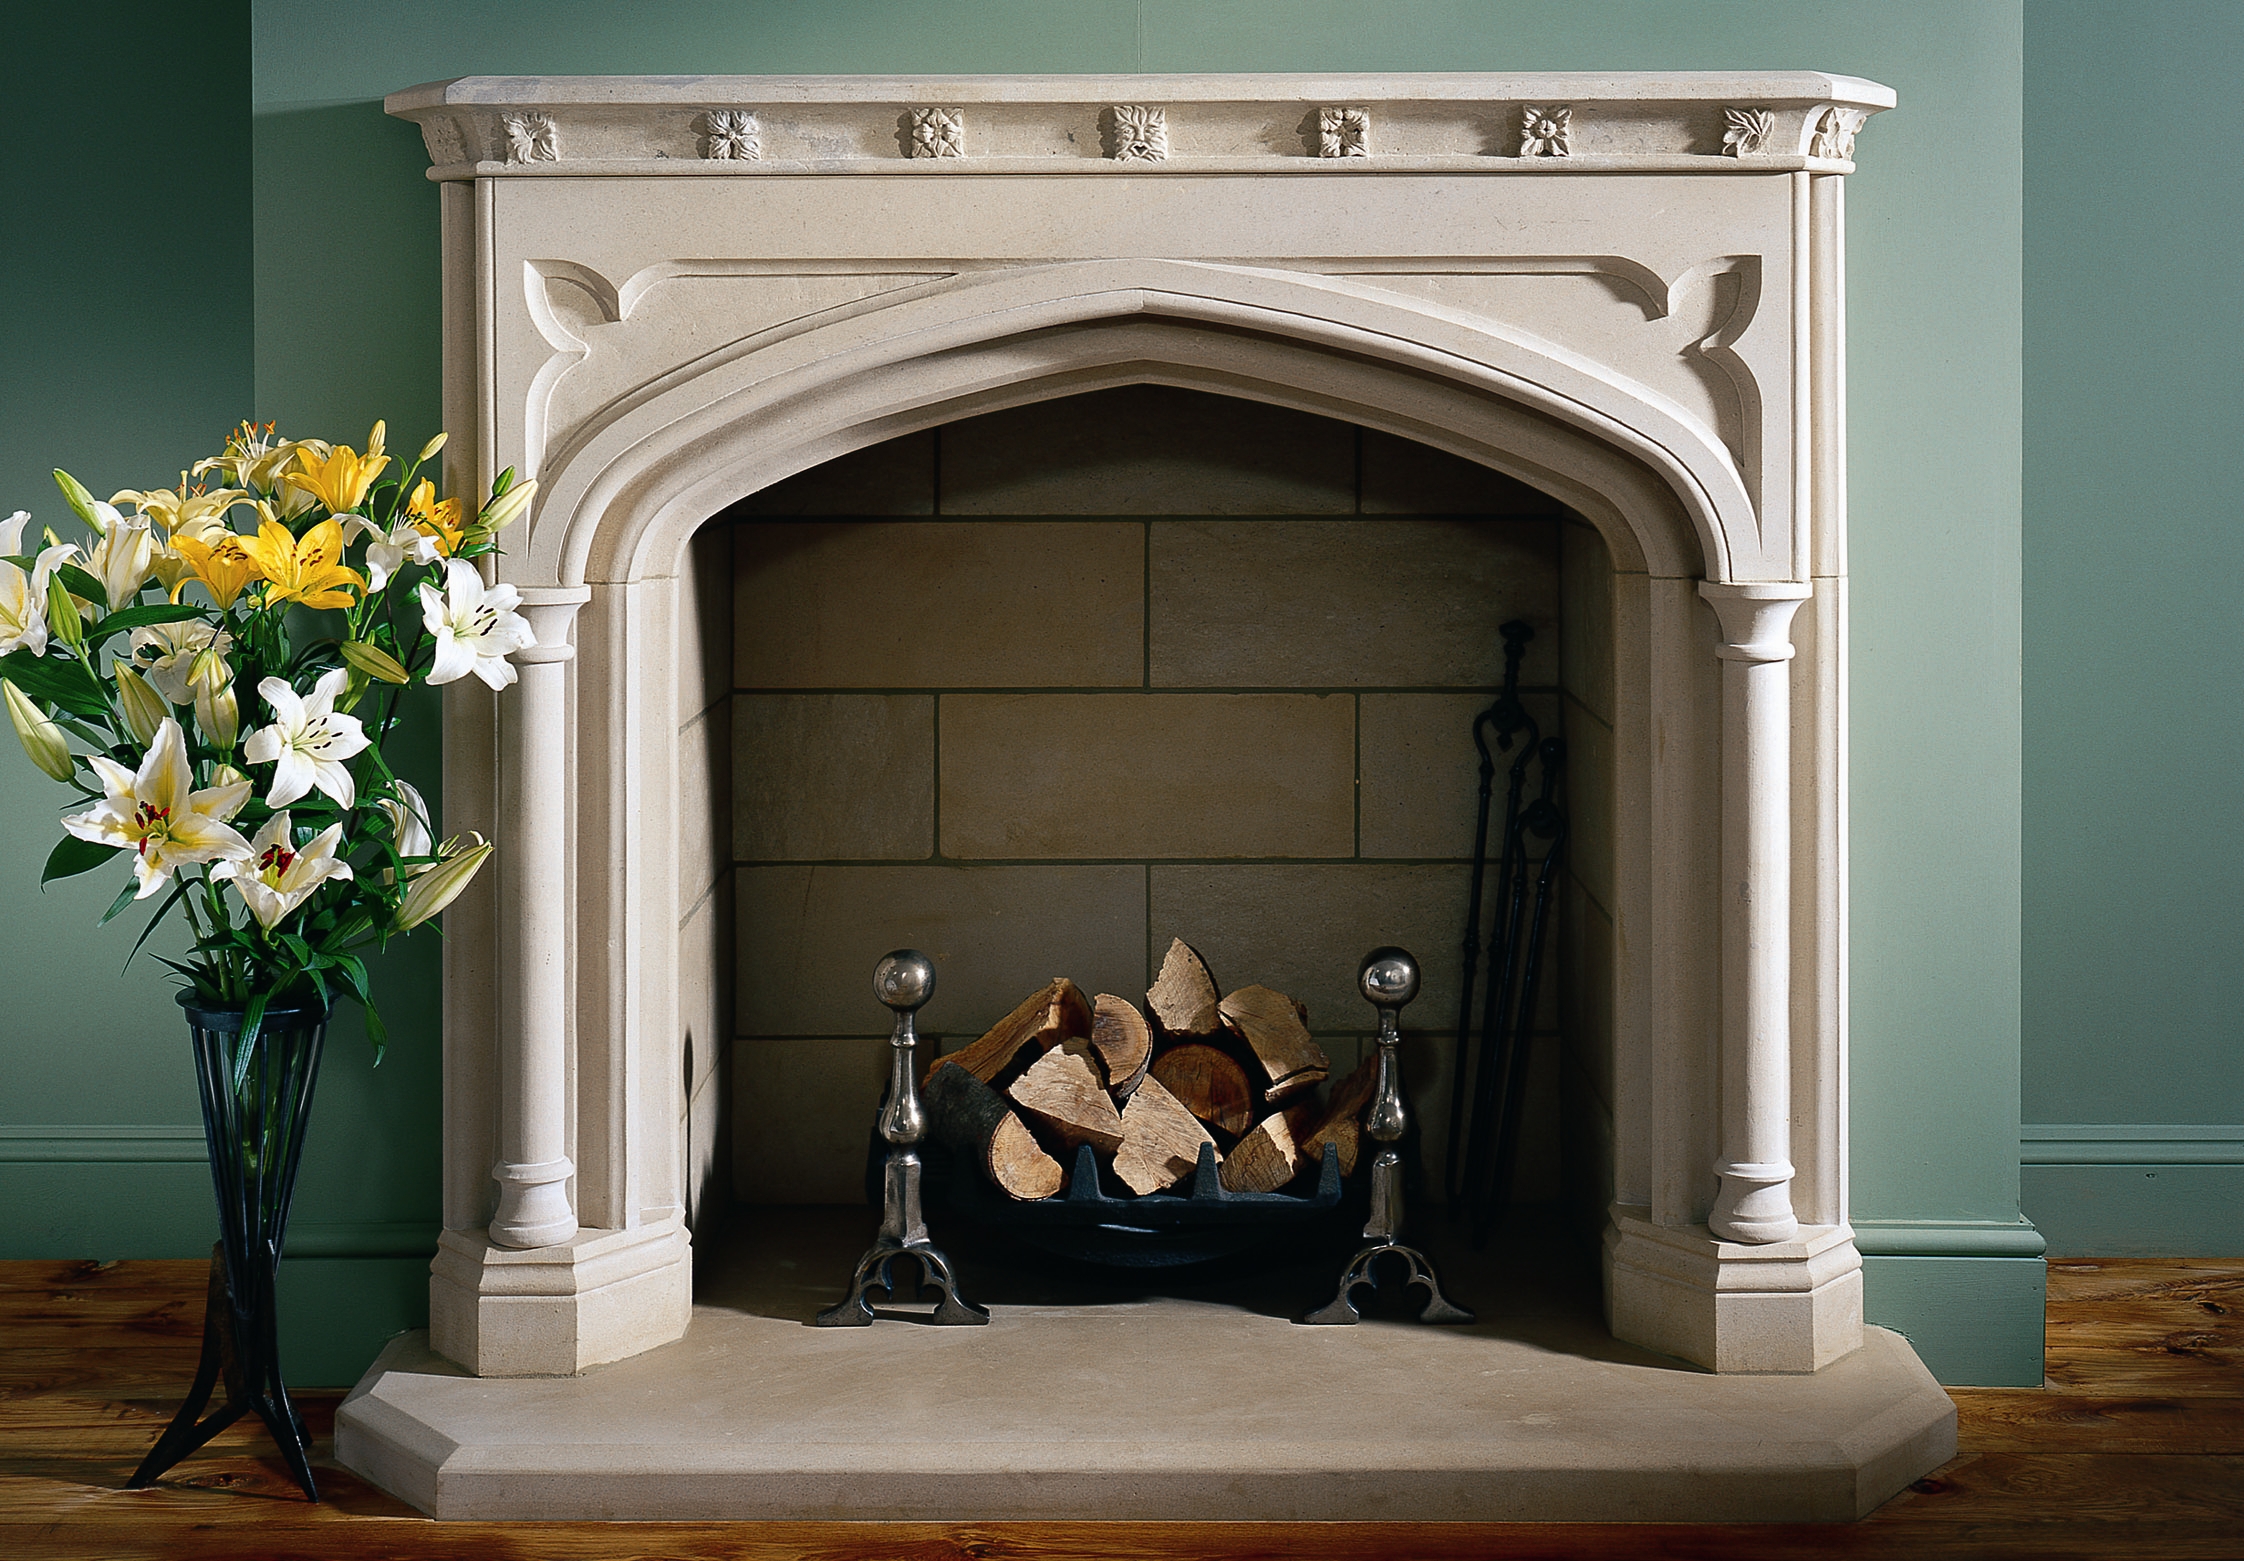 11. Gothic revival style fireplace in Portland Basebed – Staffordshire